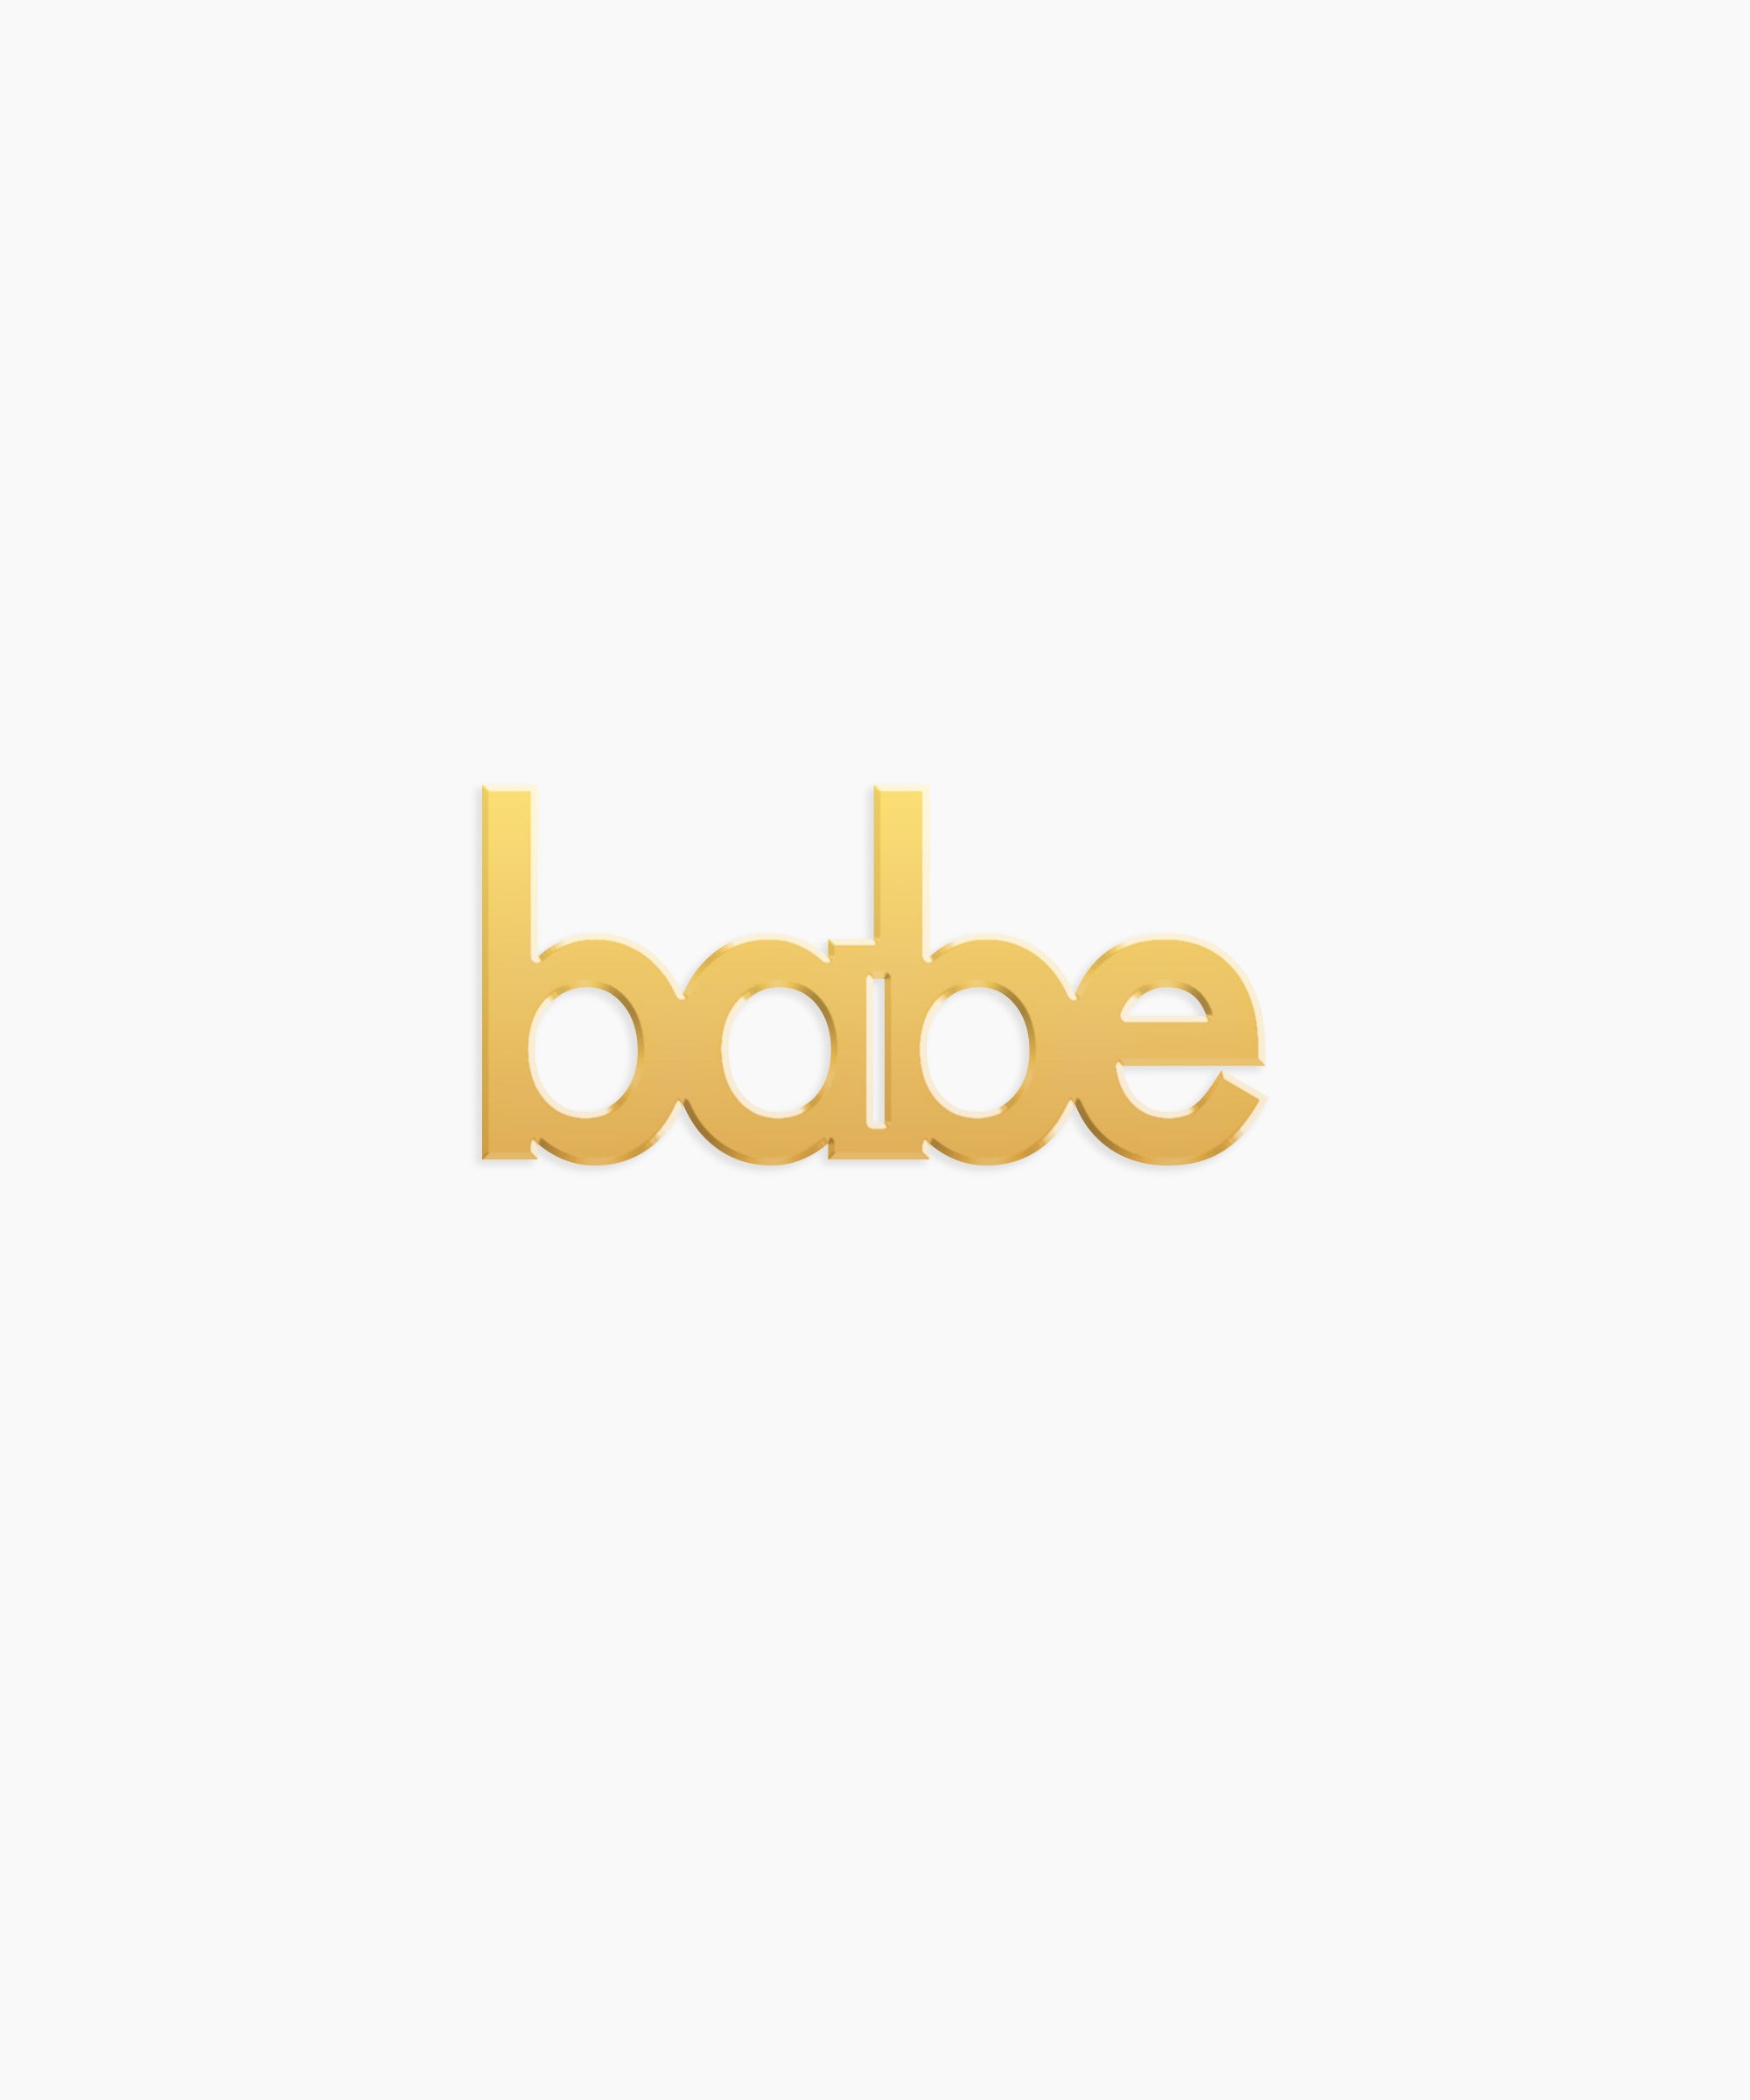 Babe Word Charm - High Quality, Affordable, Self Love, Mantra Individual Charm for a Custom Locket - Available in Gold and Silver - Made in USA - Brevity Jewelry